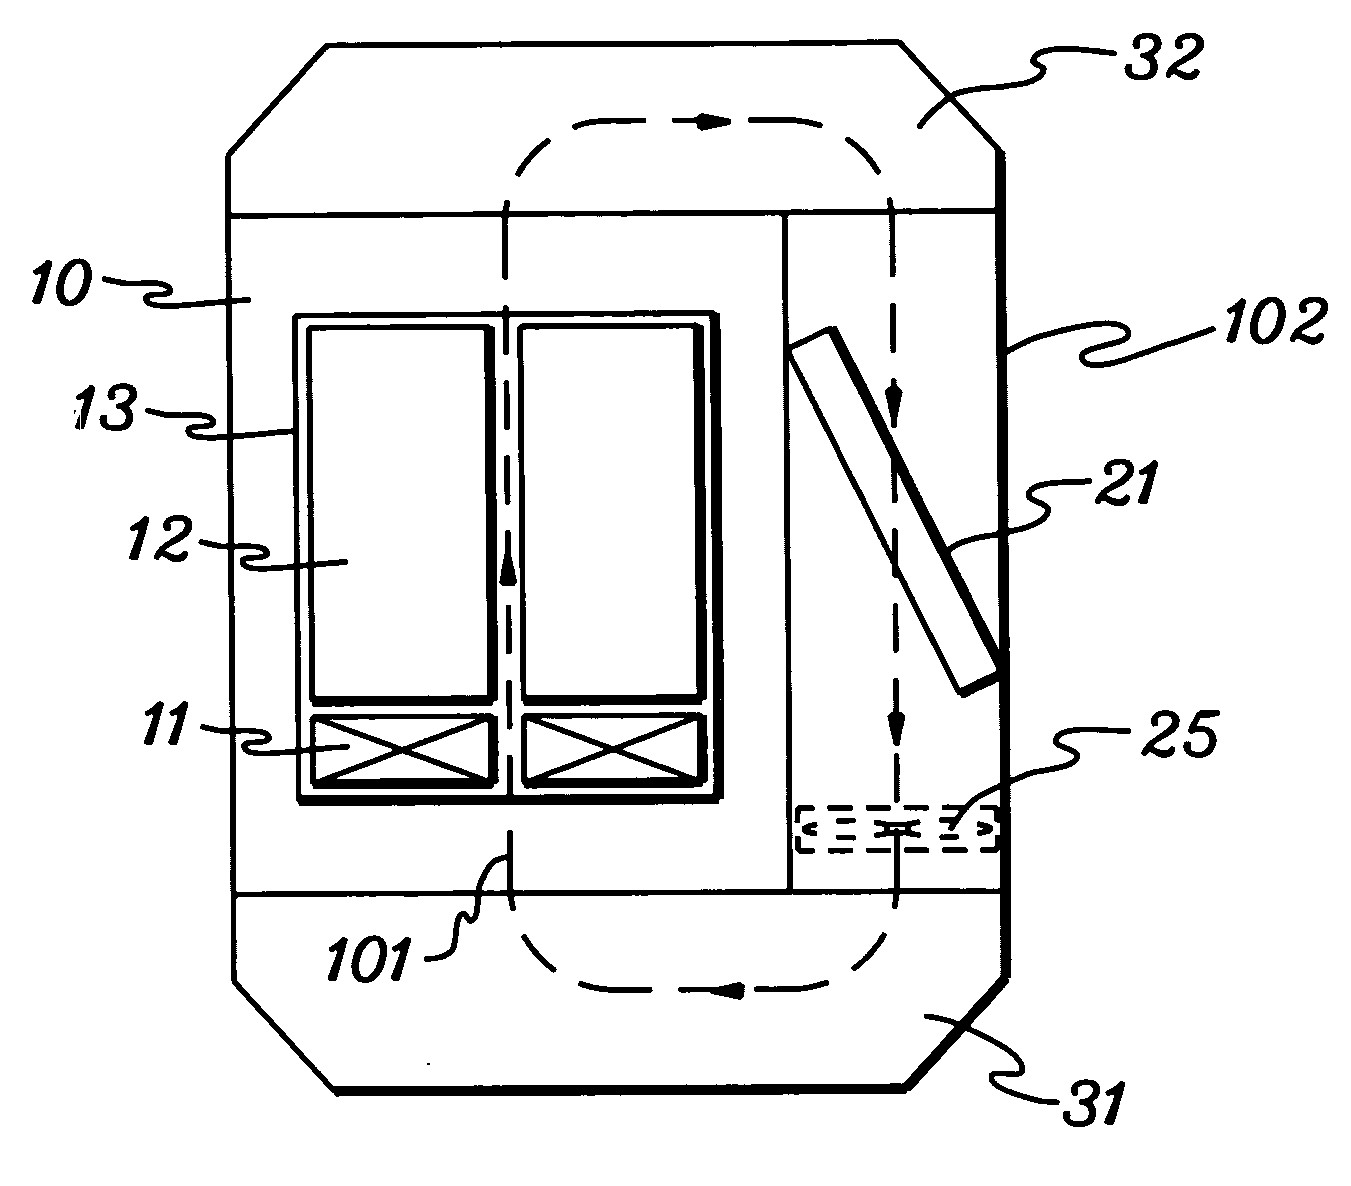 Condensate removal system and method for facilitating cooling of an electronics system